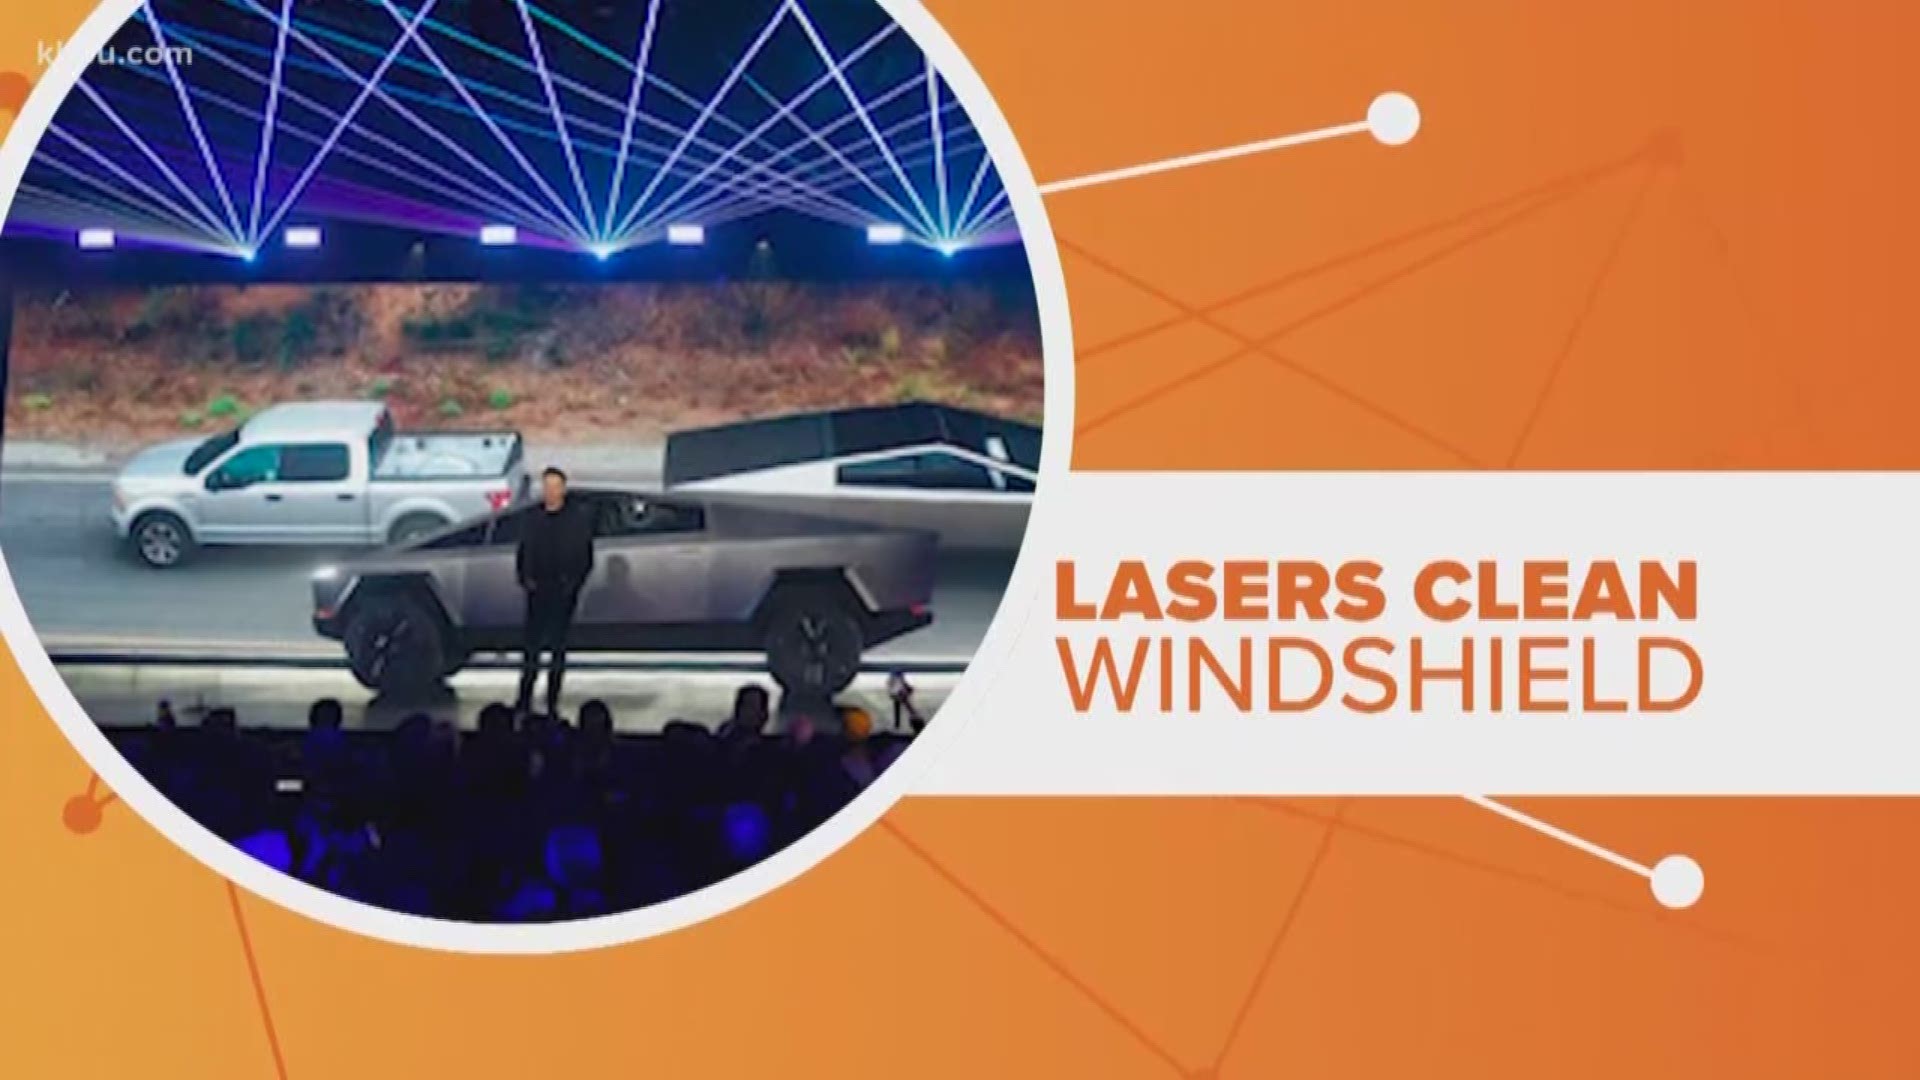 Windshield wipers replaced with a laser beam. It's the concept of a new patent Tesla filed. Larry Seward connects the dots.